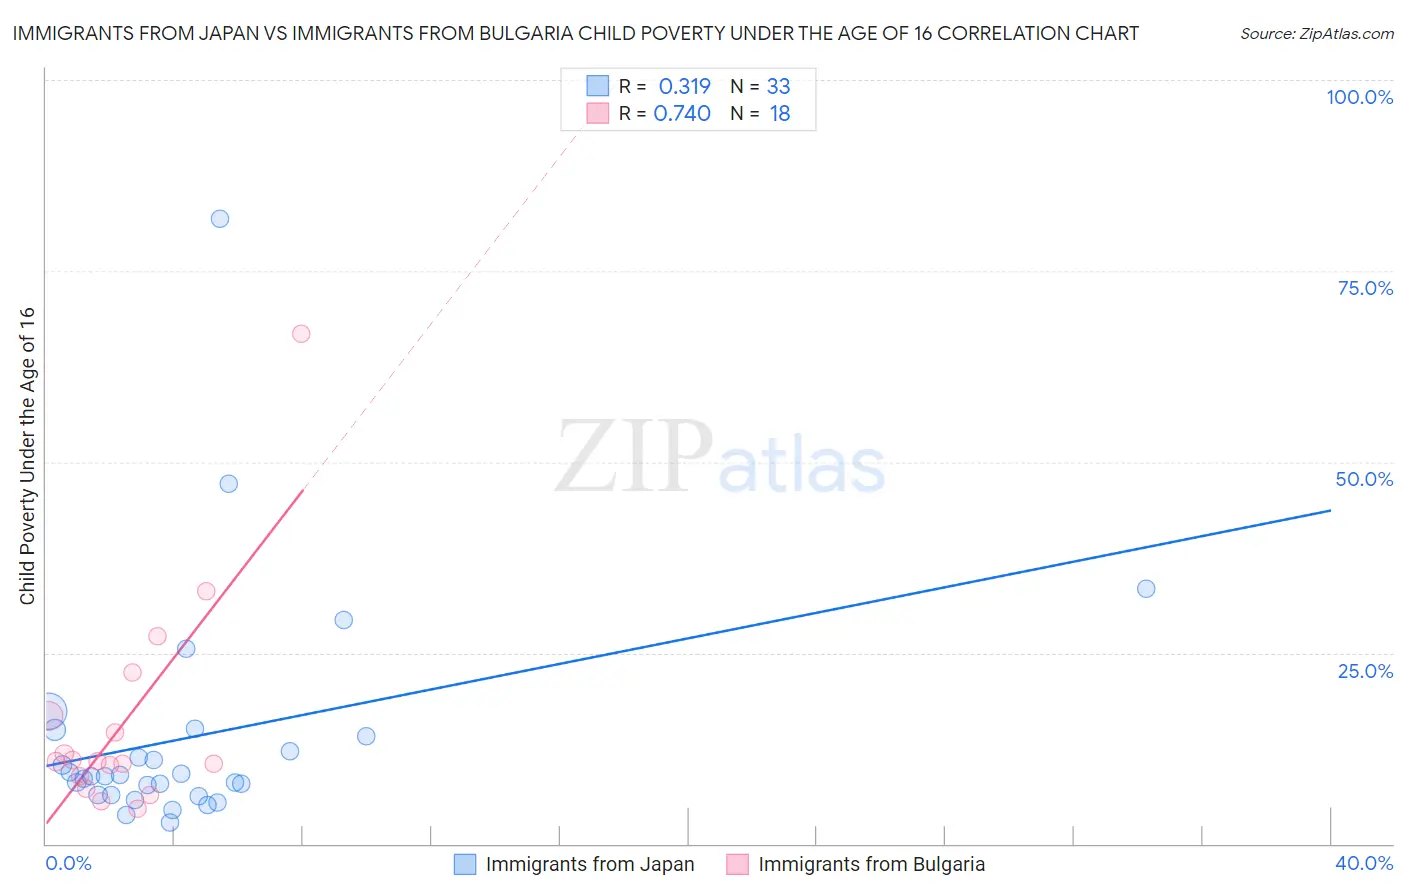 Immigrants from Japan vs Immigrants from Bulgaria Child Poverty Under the Age of 16